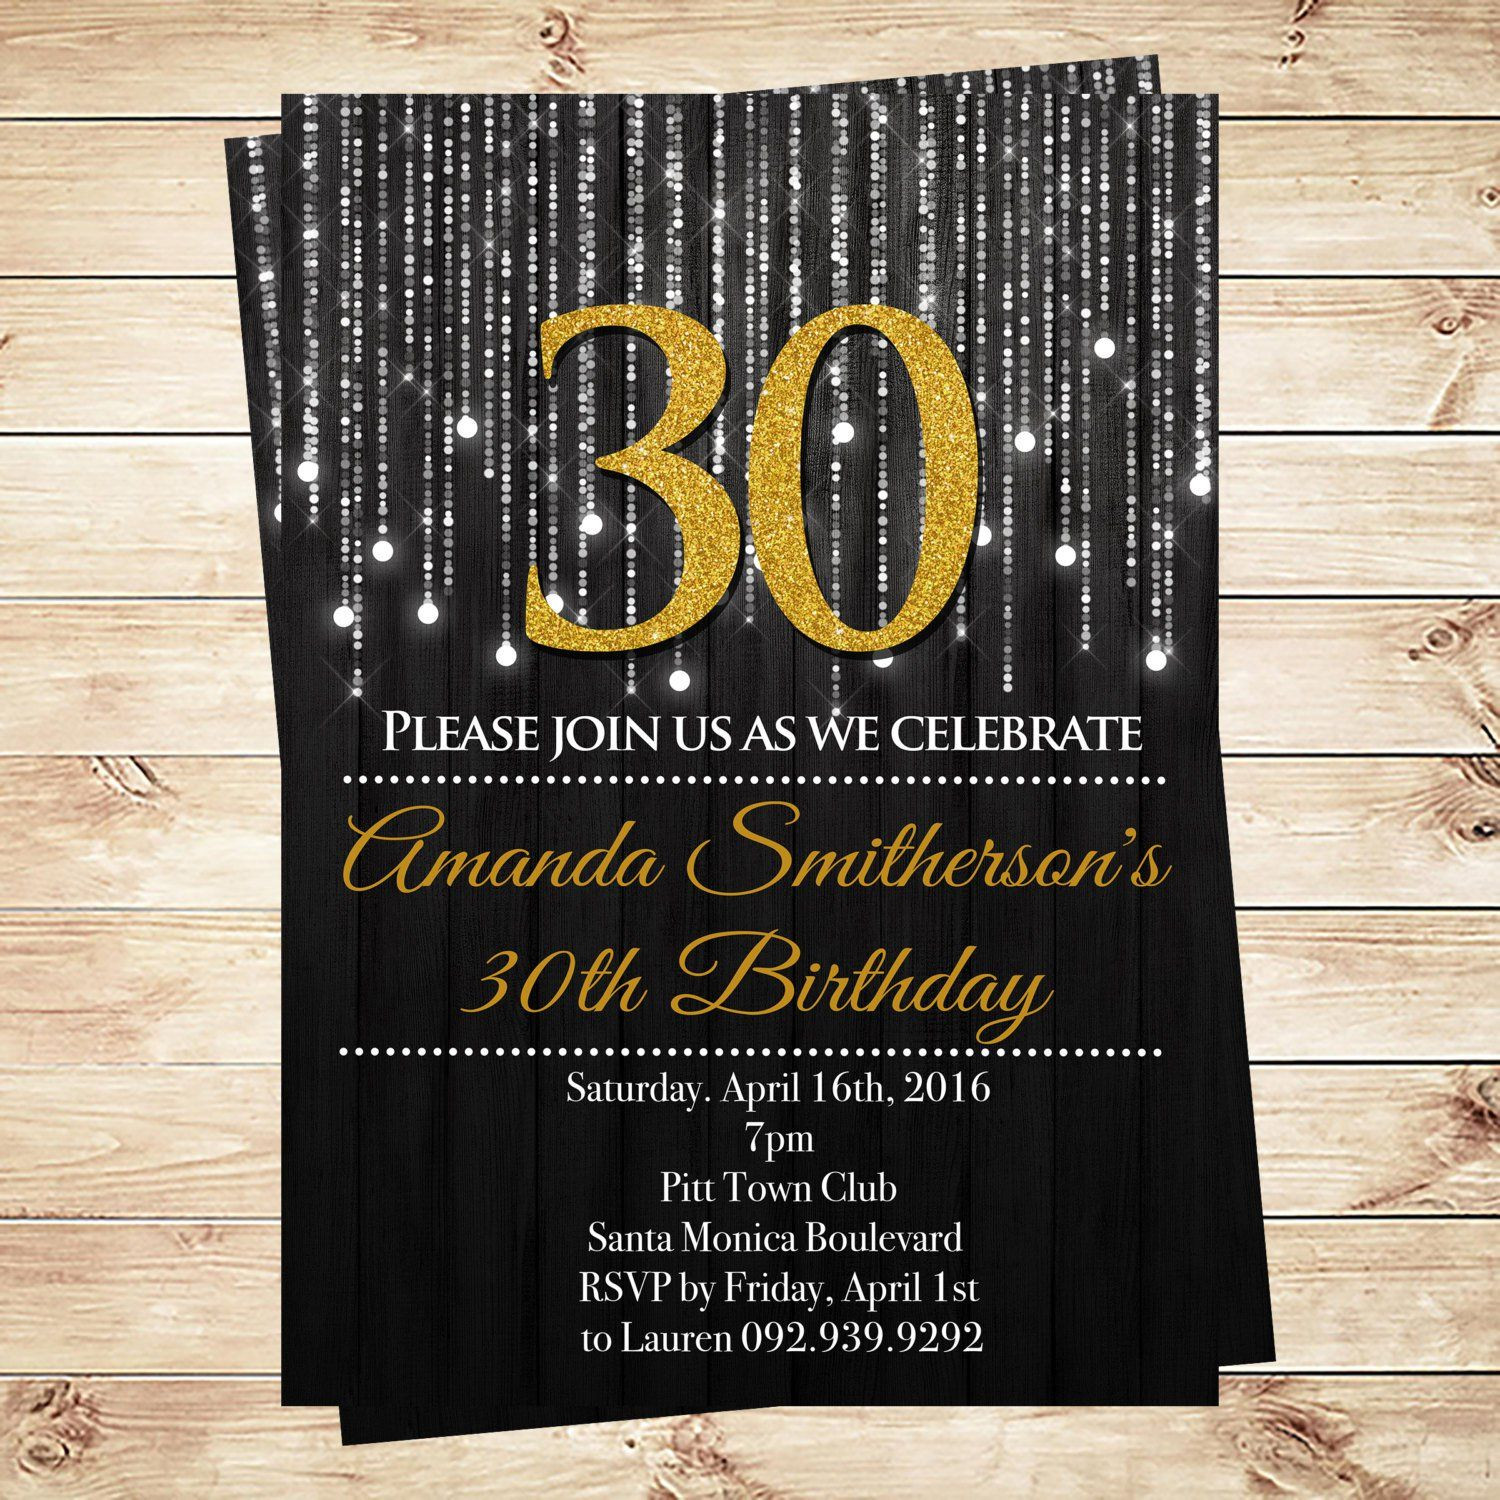 30th Birthday Invitations For Her
 30th Birthday Invitation Templates For Her • Business